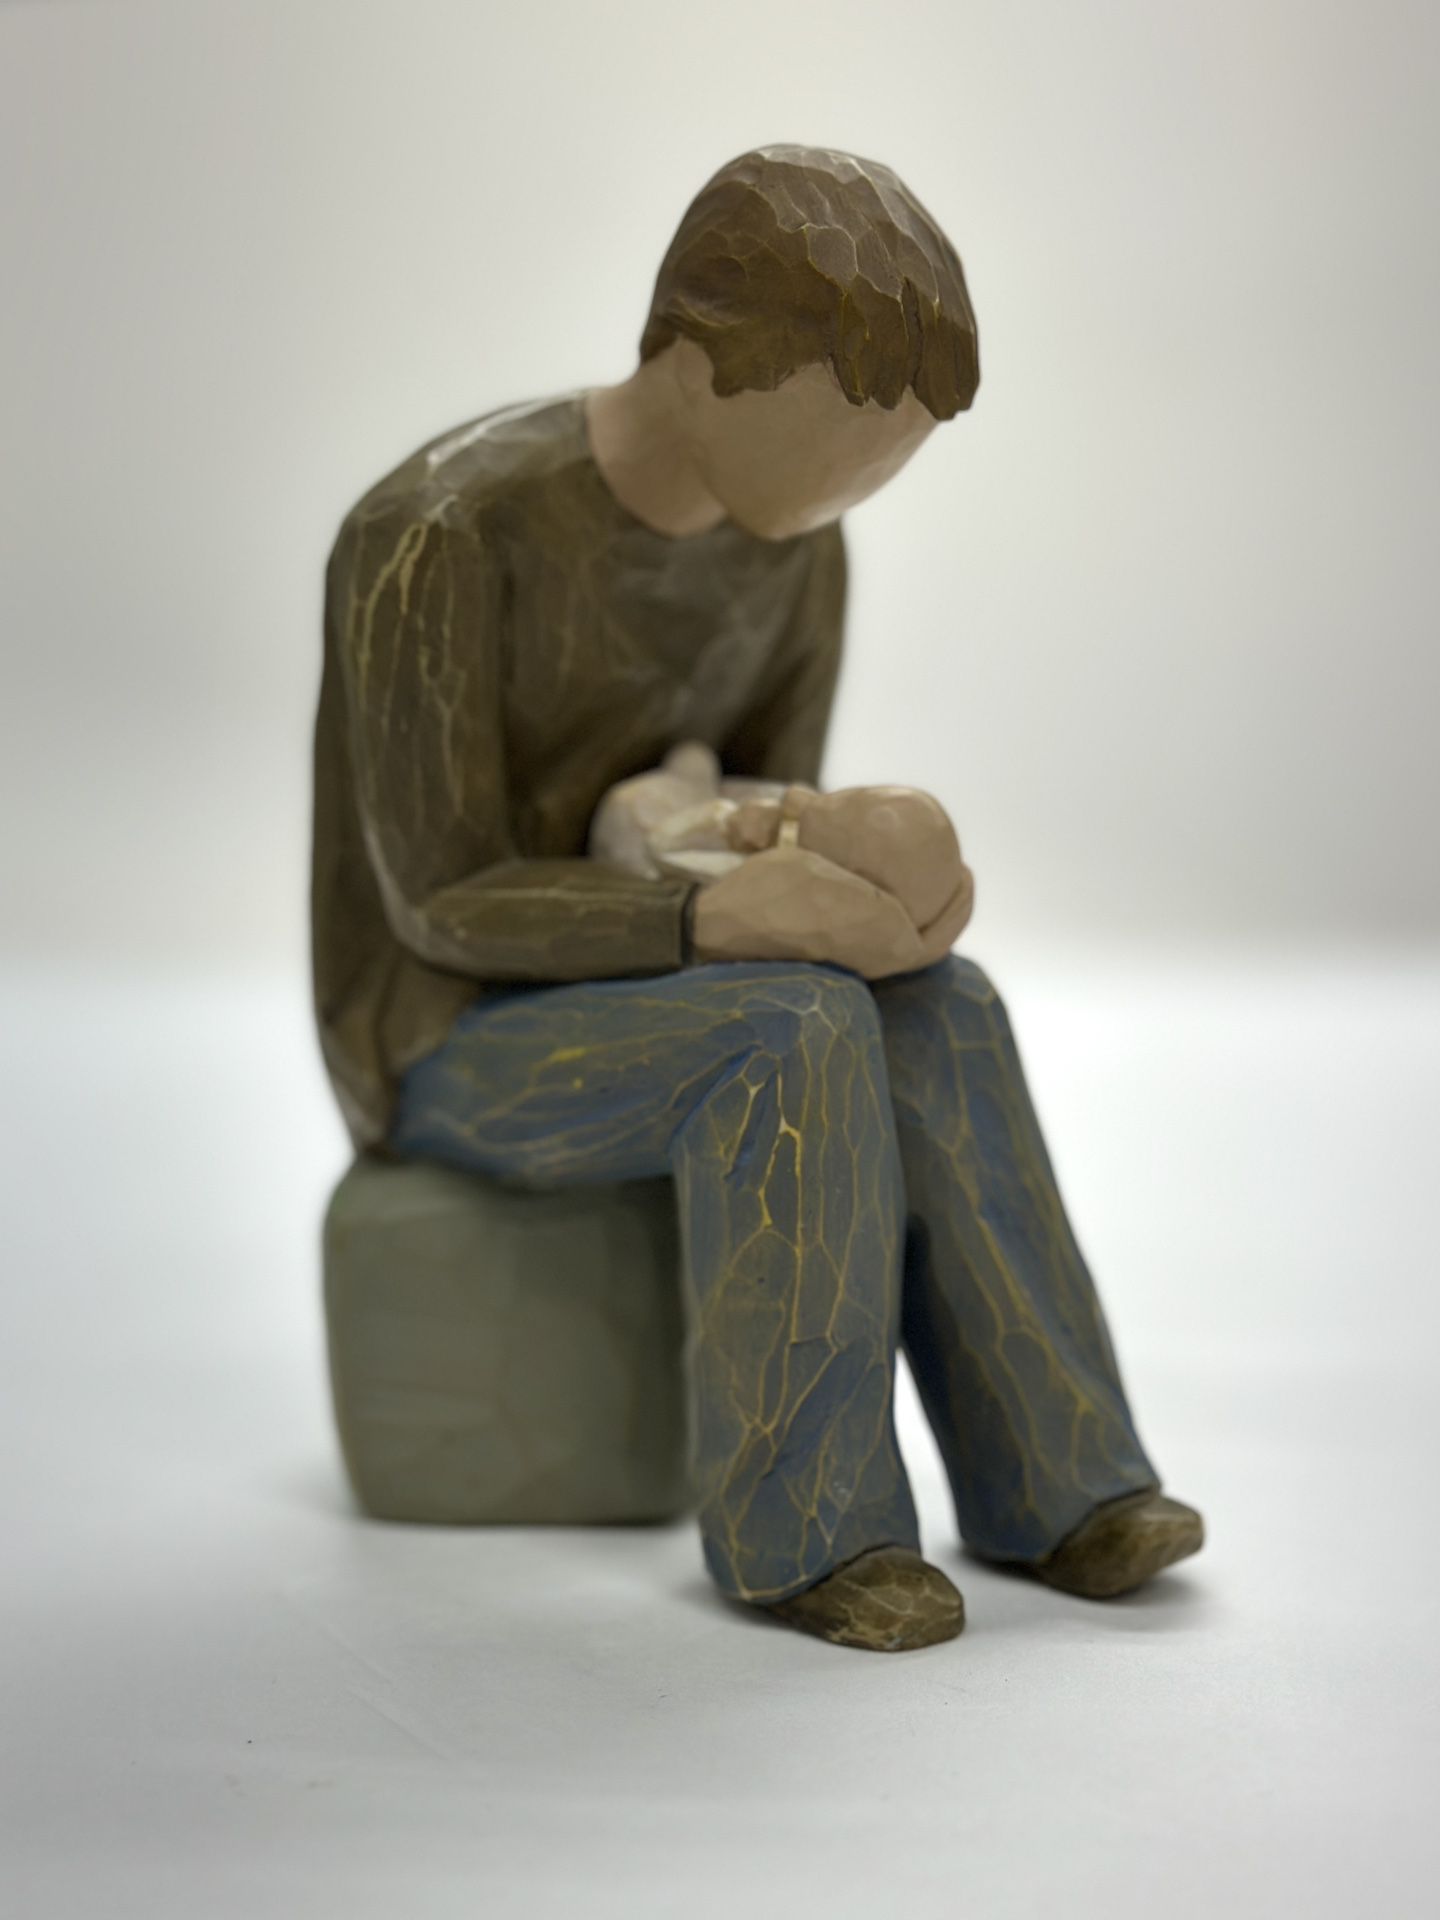 Willow tree new dad timeless figure sculpture - perfect for Father’s Day